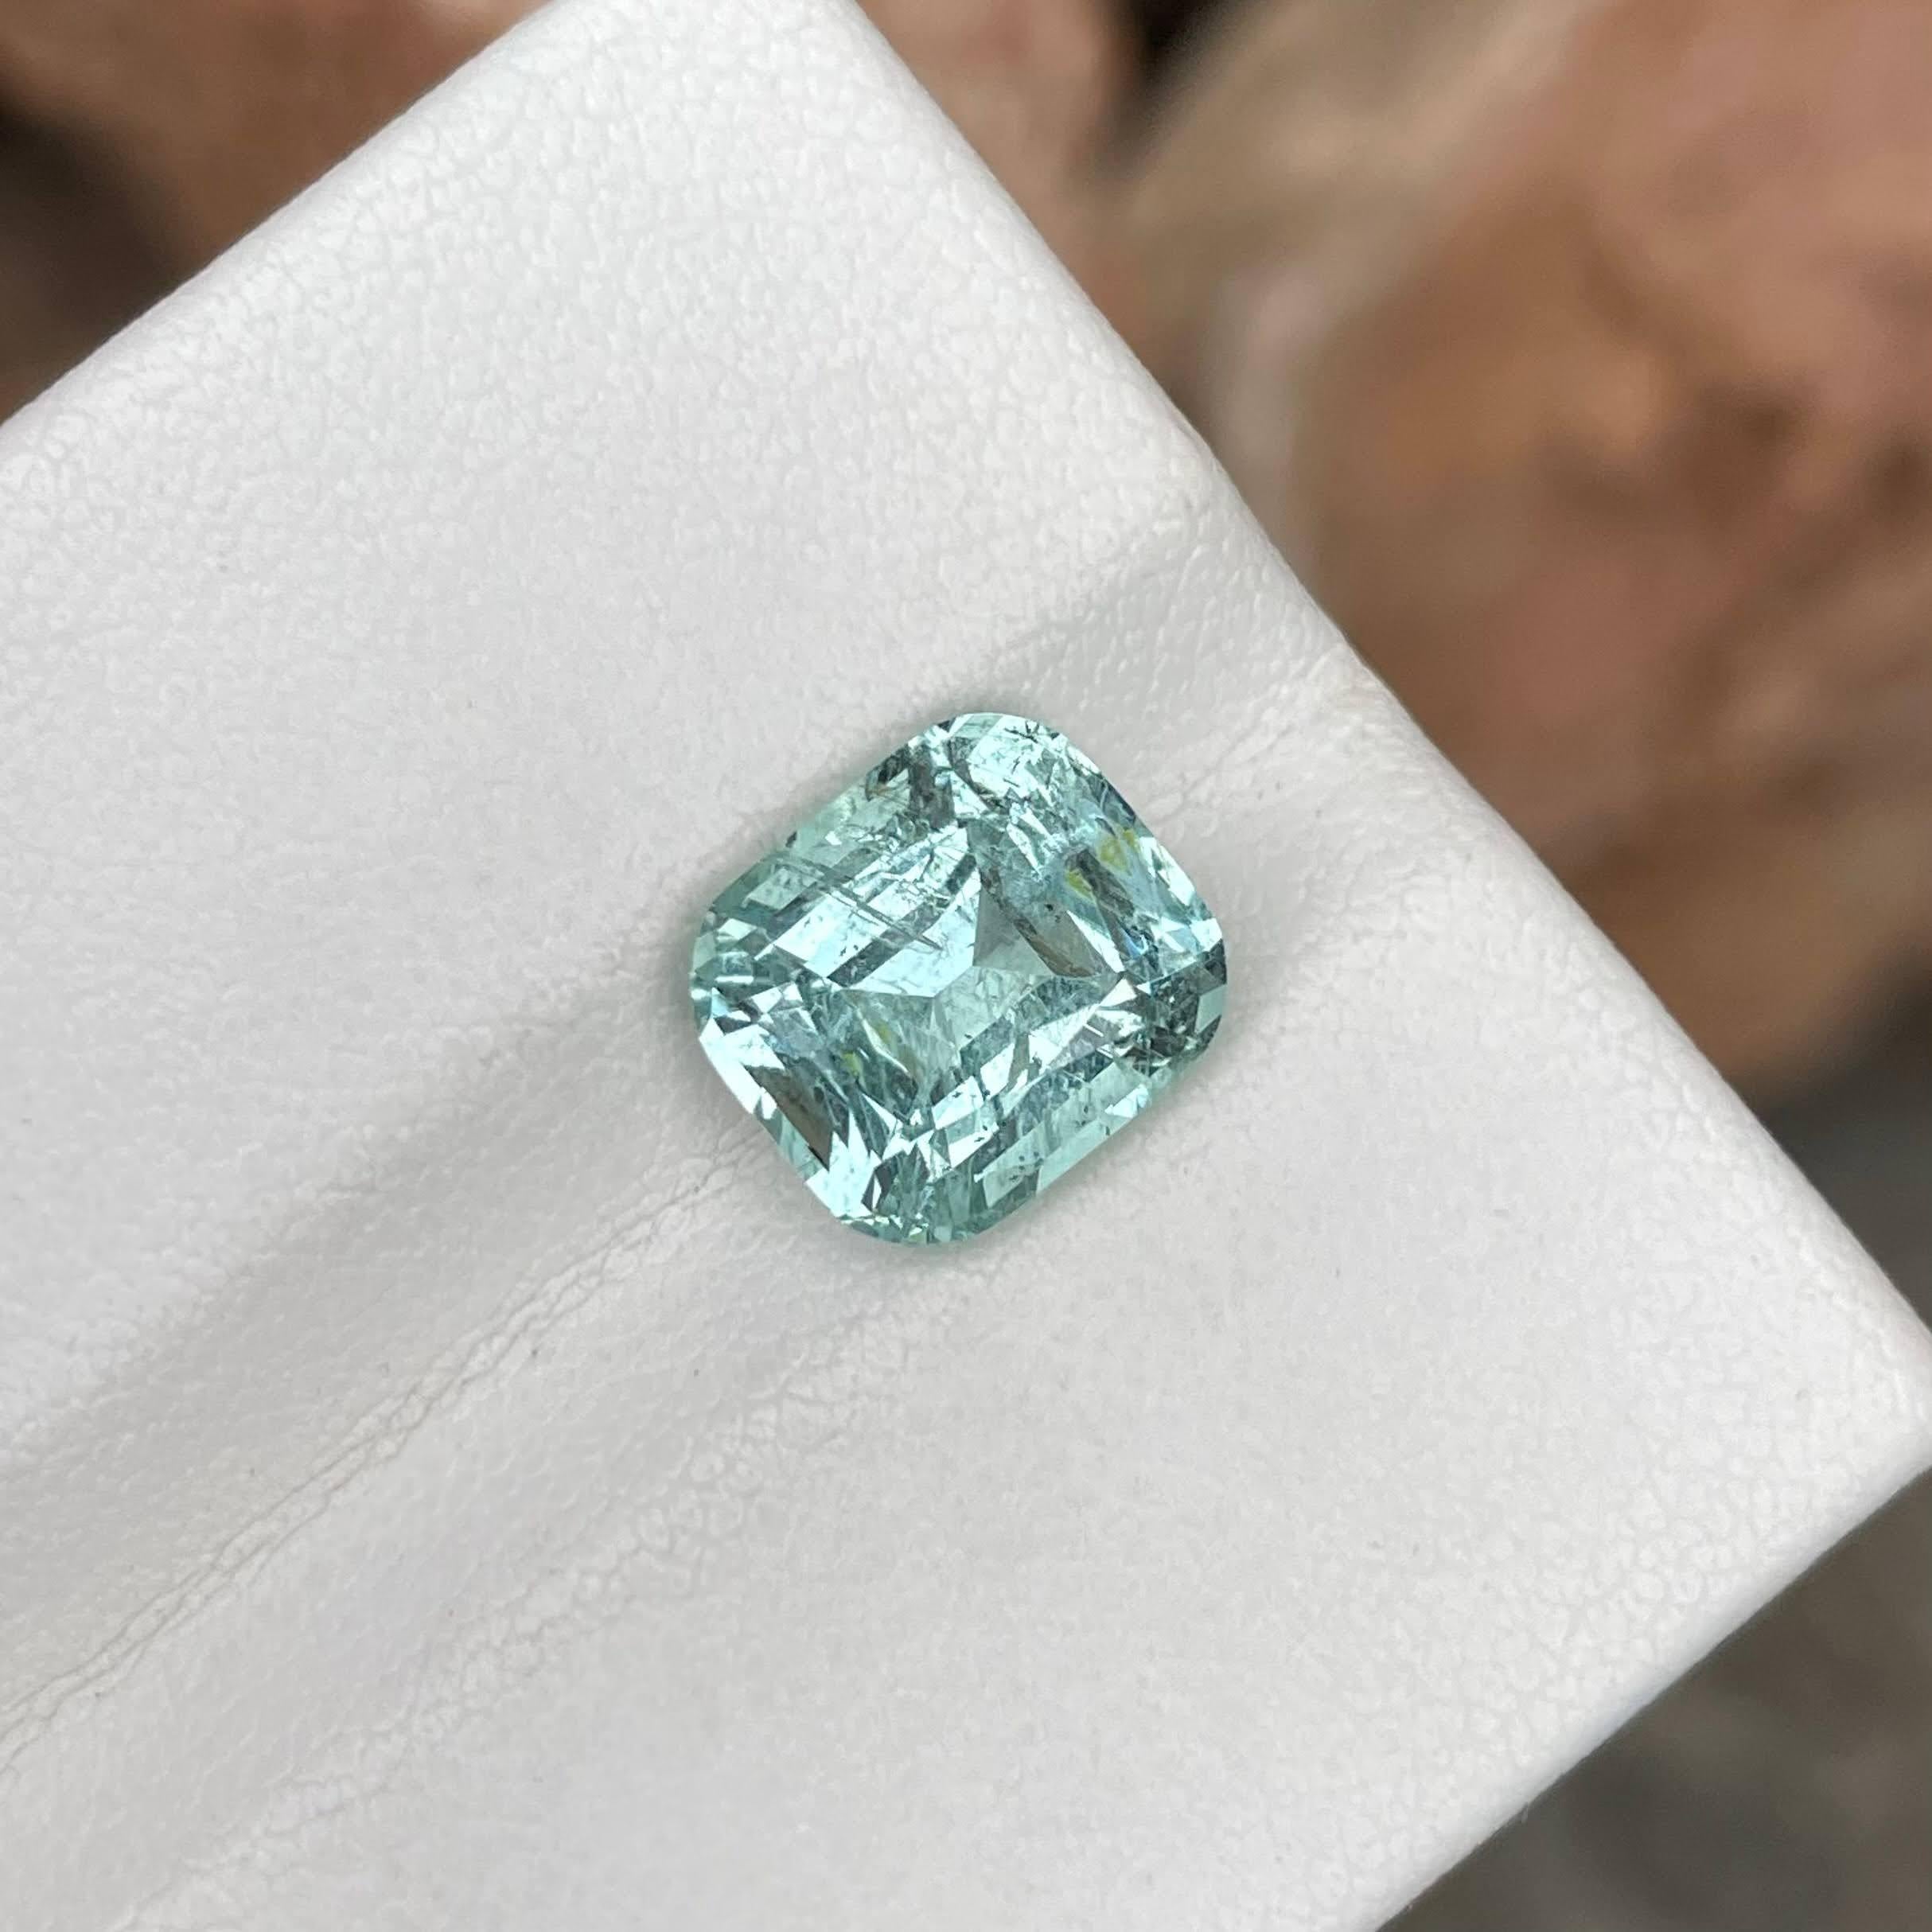 Weight 3.55 carats 
Dimensions 9.9x8.7x6.3 mm
Treatment none 
Origin Pakistan 
Clarity SI
Shape cushion 
Cut fancy cushion 




The Sea Blue Aquamarine gemstone, boasting a generous weight of 3.55 carats, presents an exquisite display of natural